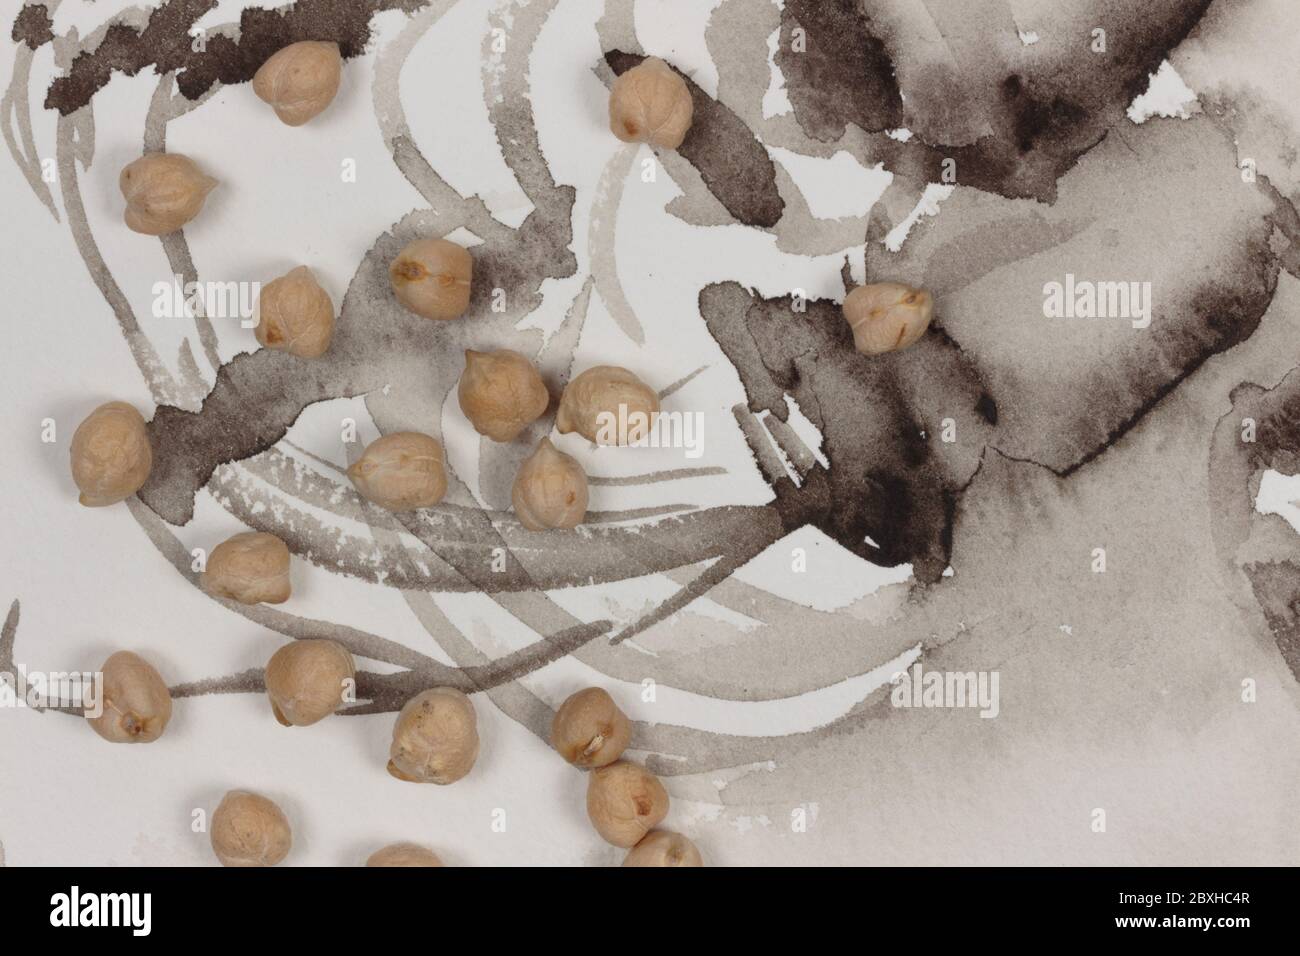 scattered, dry garbanzo beans or chick peas on an abstract, brown sepia ink background with copy space Stock Photo